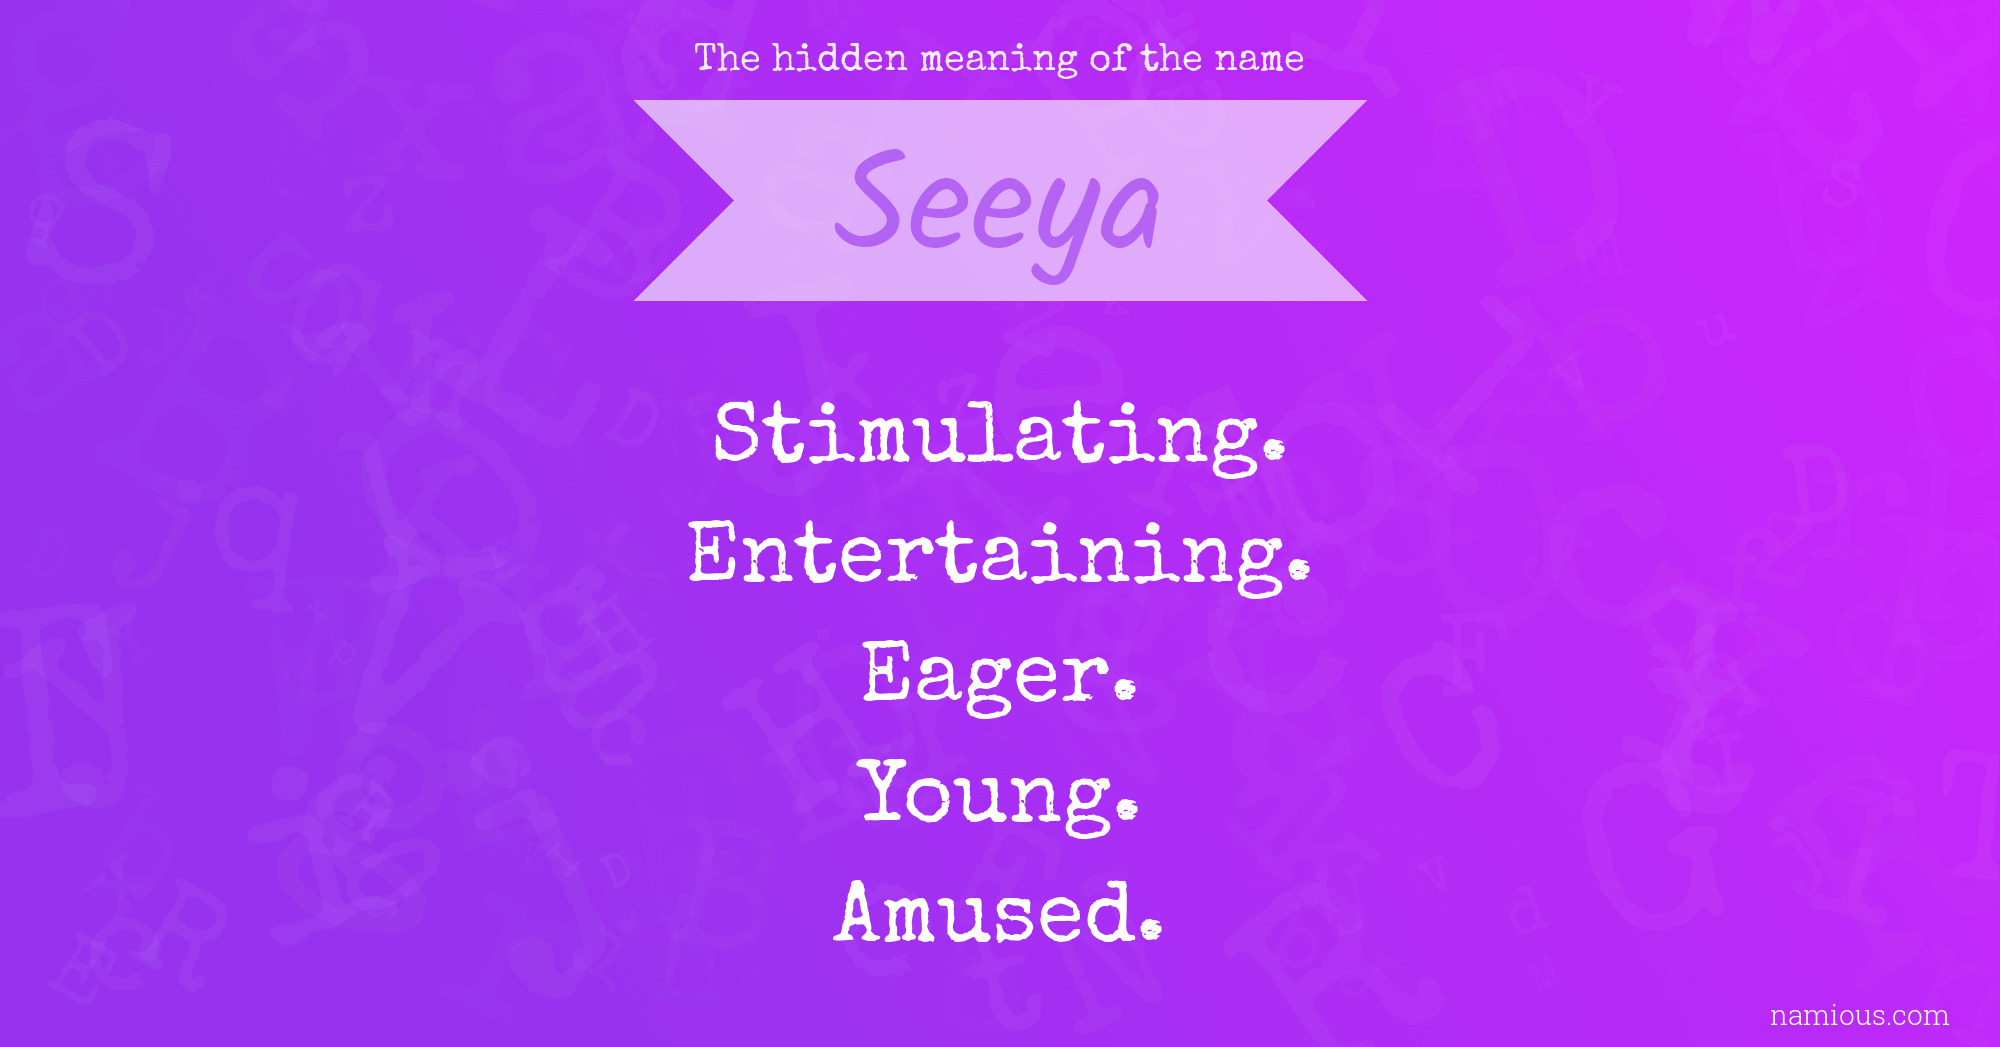 The hidden meaning of the name Seeya